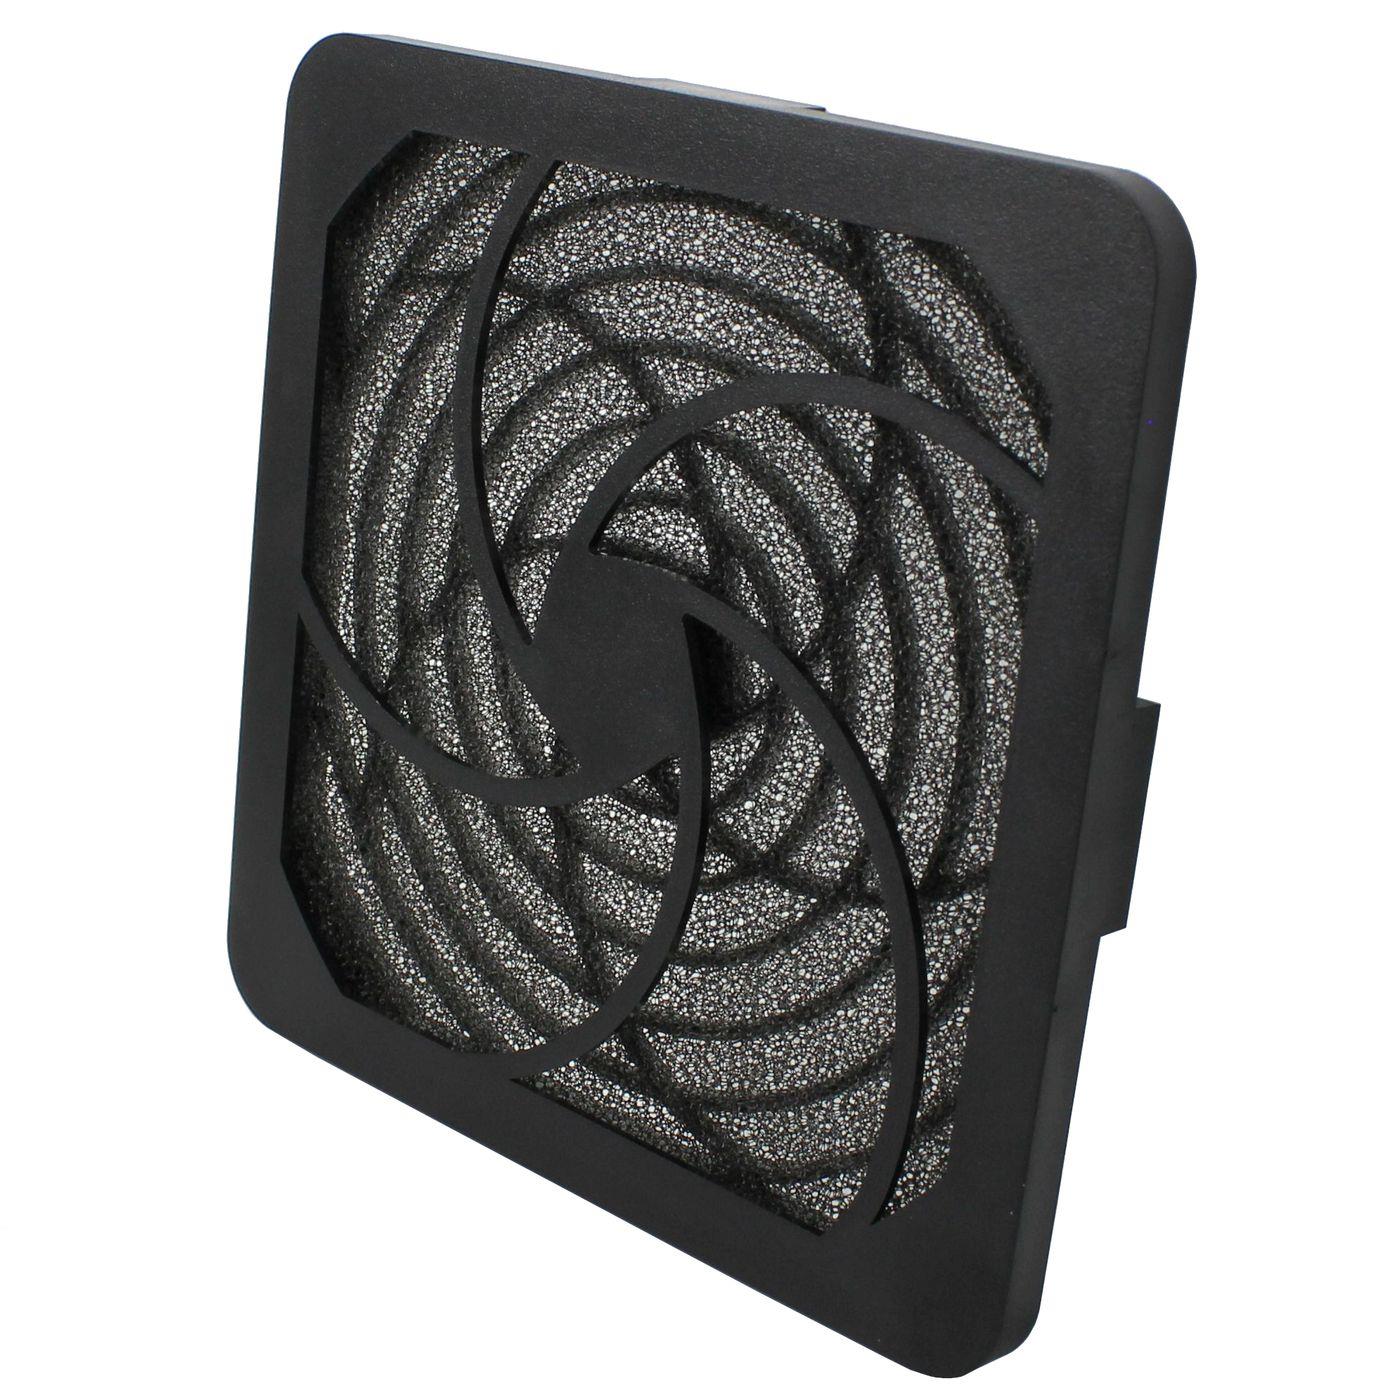 Fan grille + Dust filter 120x120mm 30ppi 3-part spin-on filter